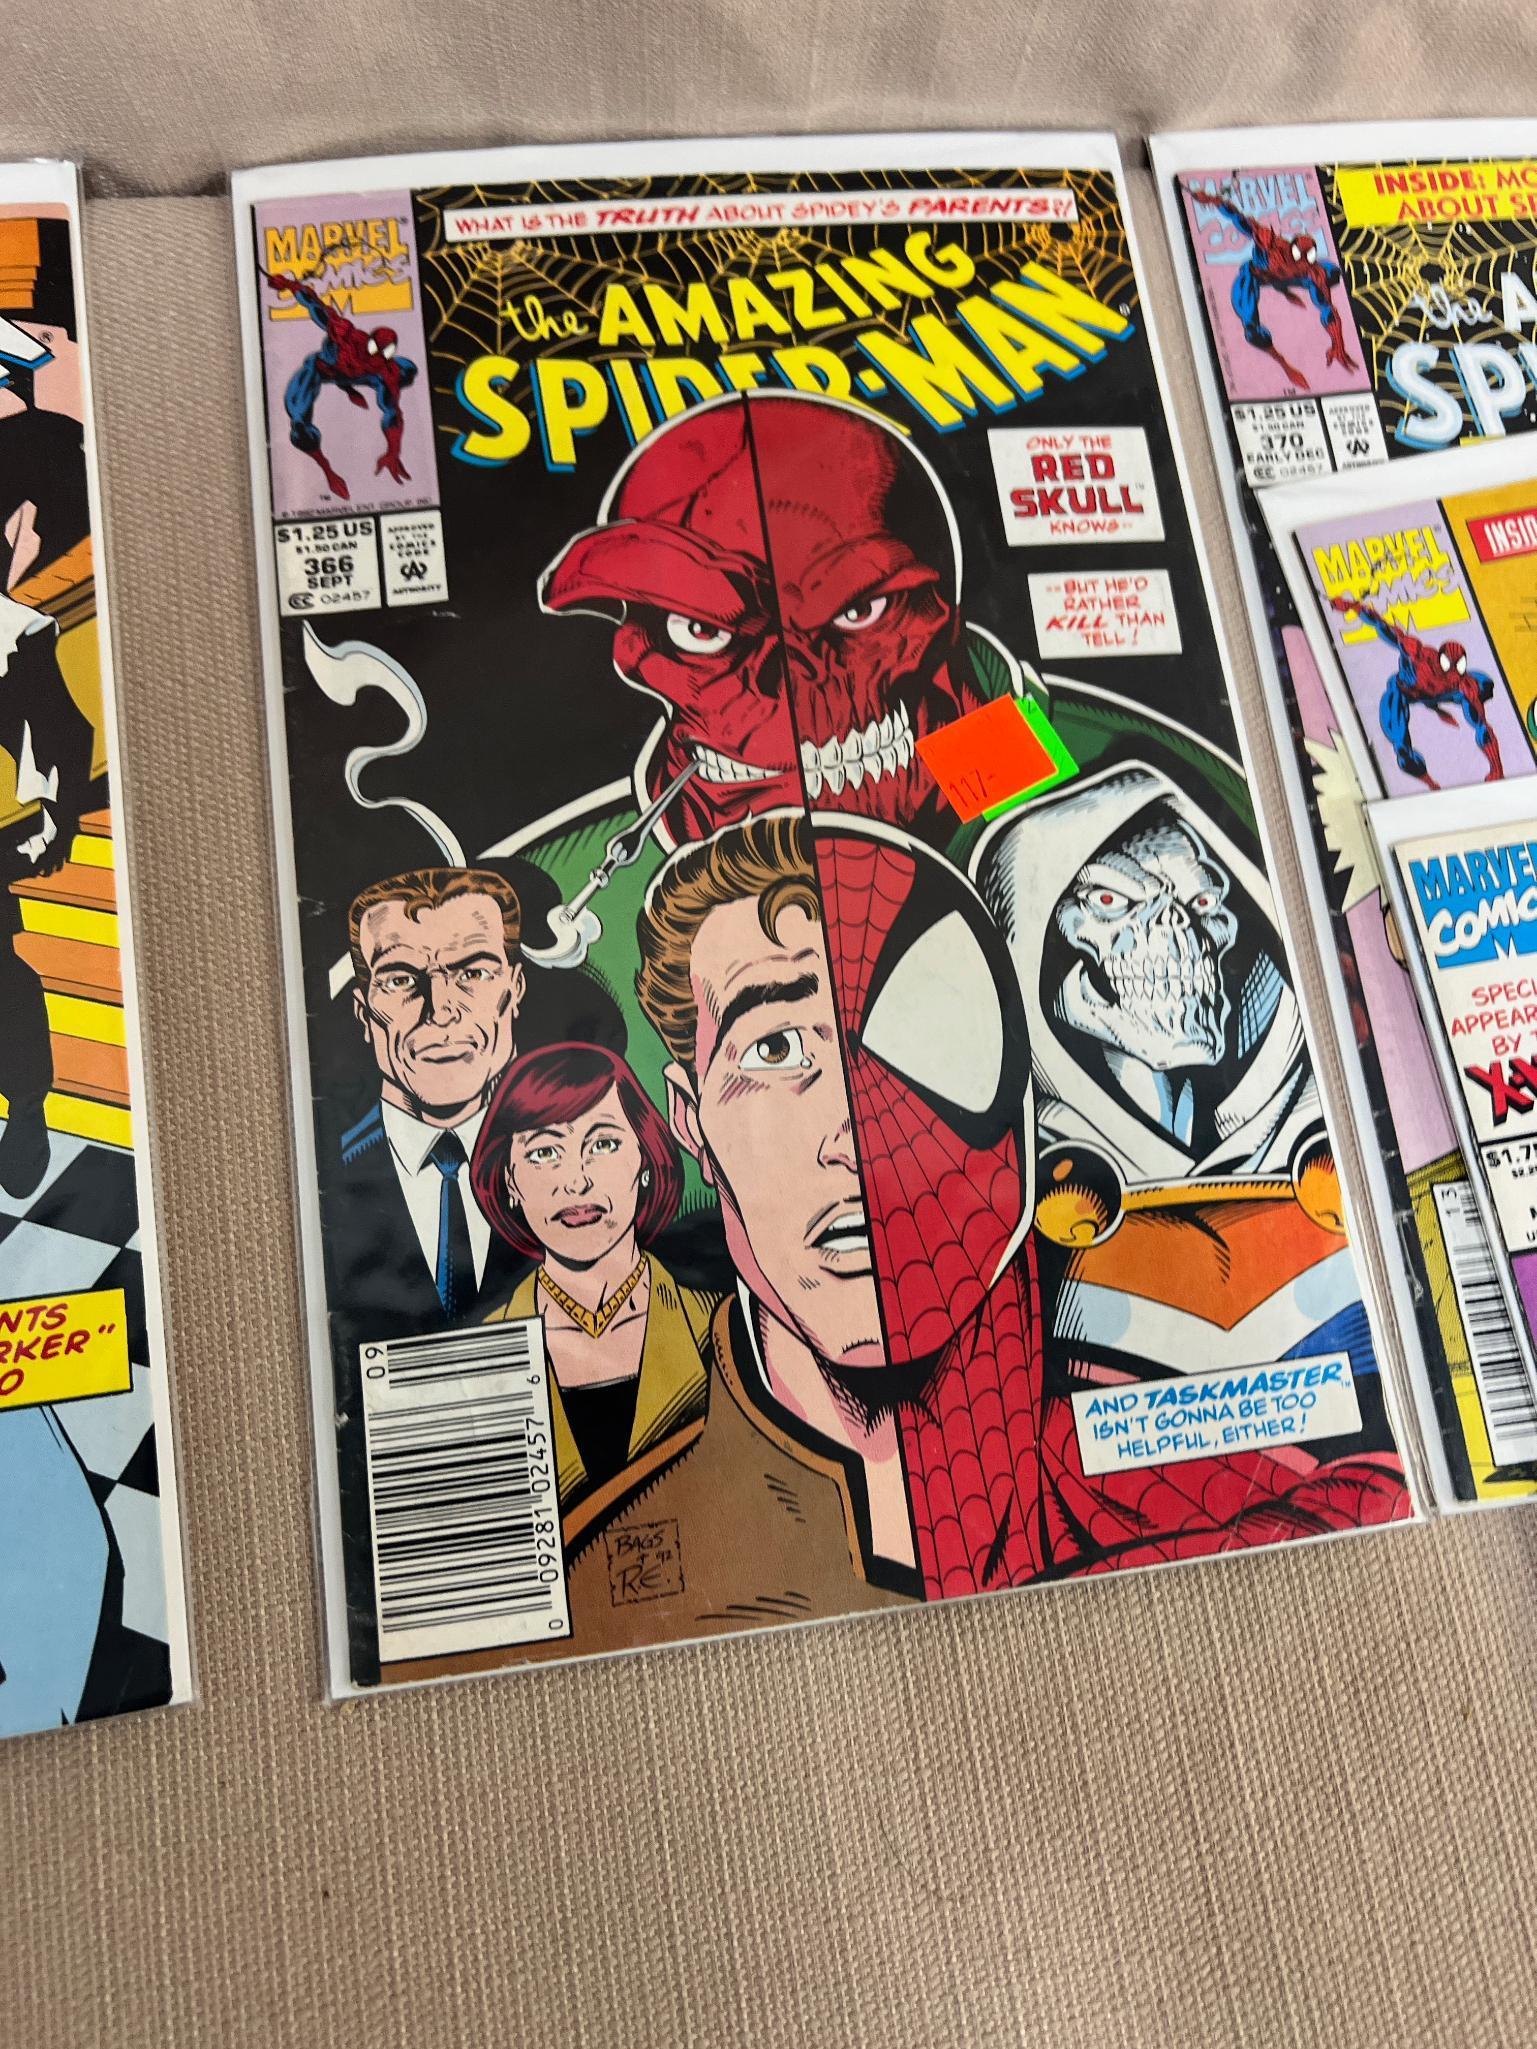 25- Spiderman and Spiderman Related Comic Books, nice mix, see pics